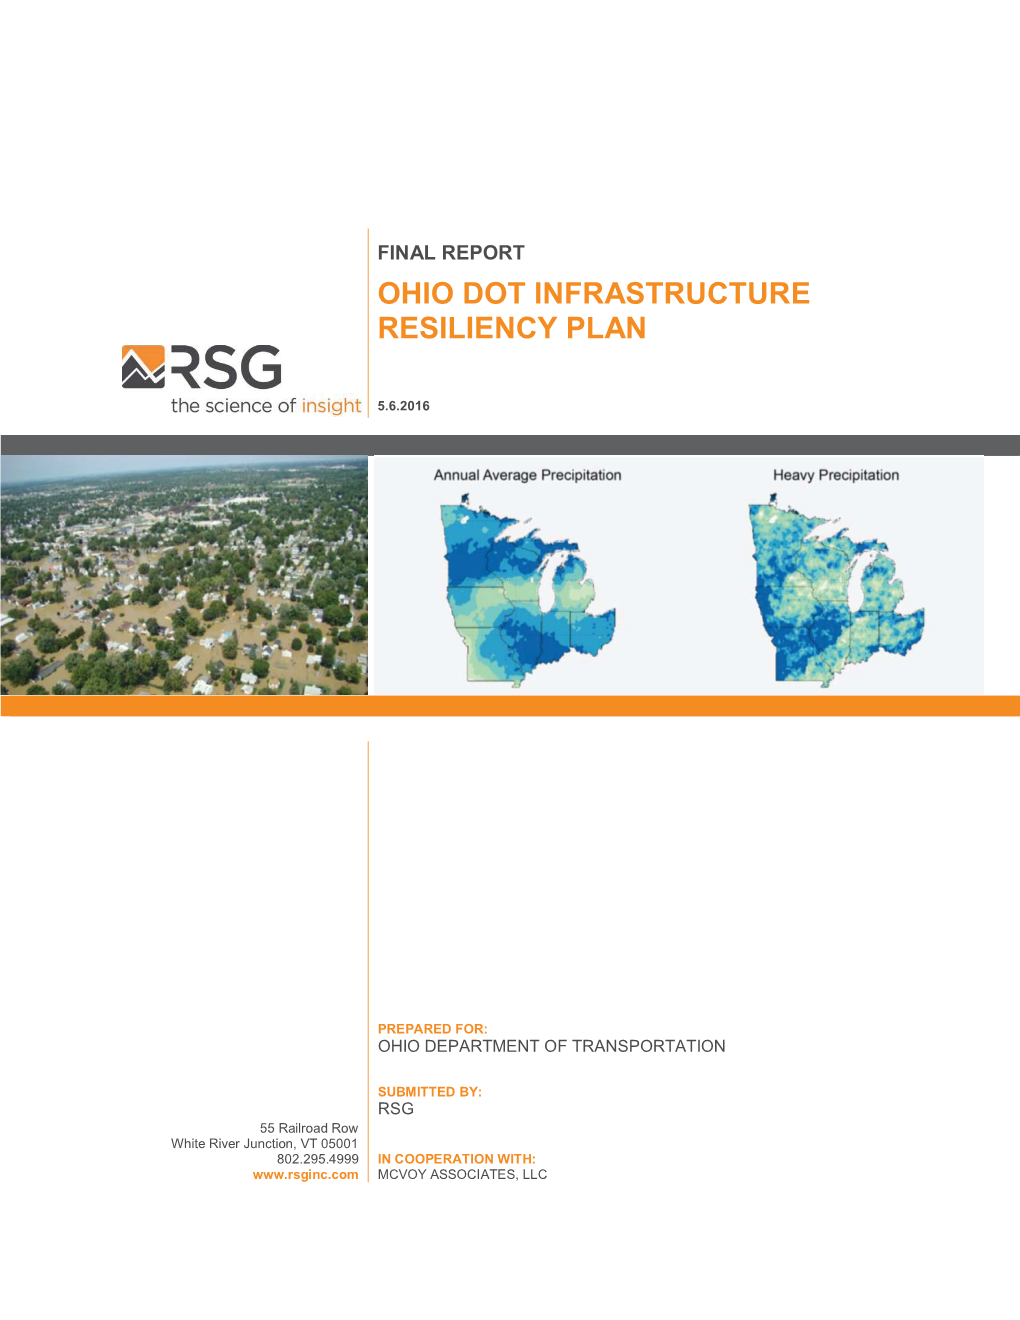 Ohio Dot Infrastructure Resiliency Plan